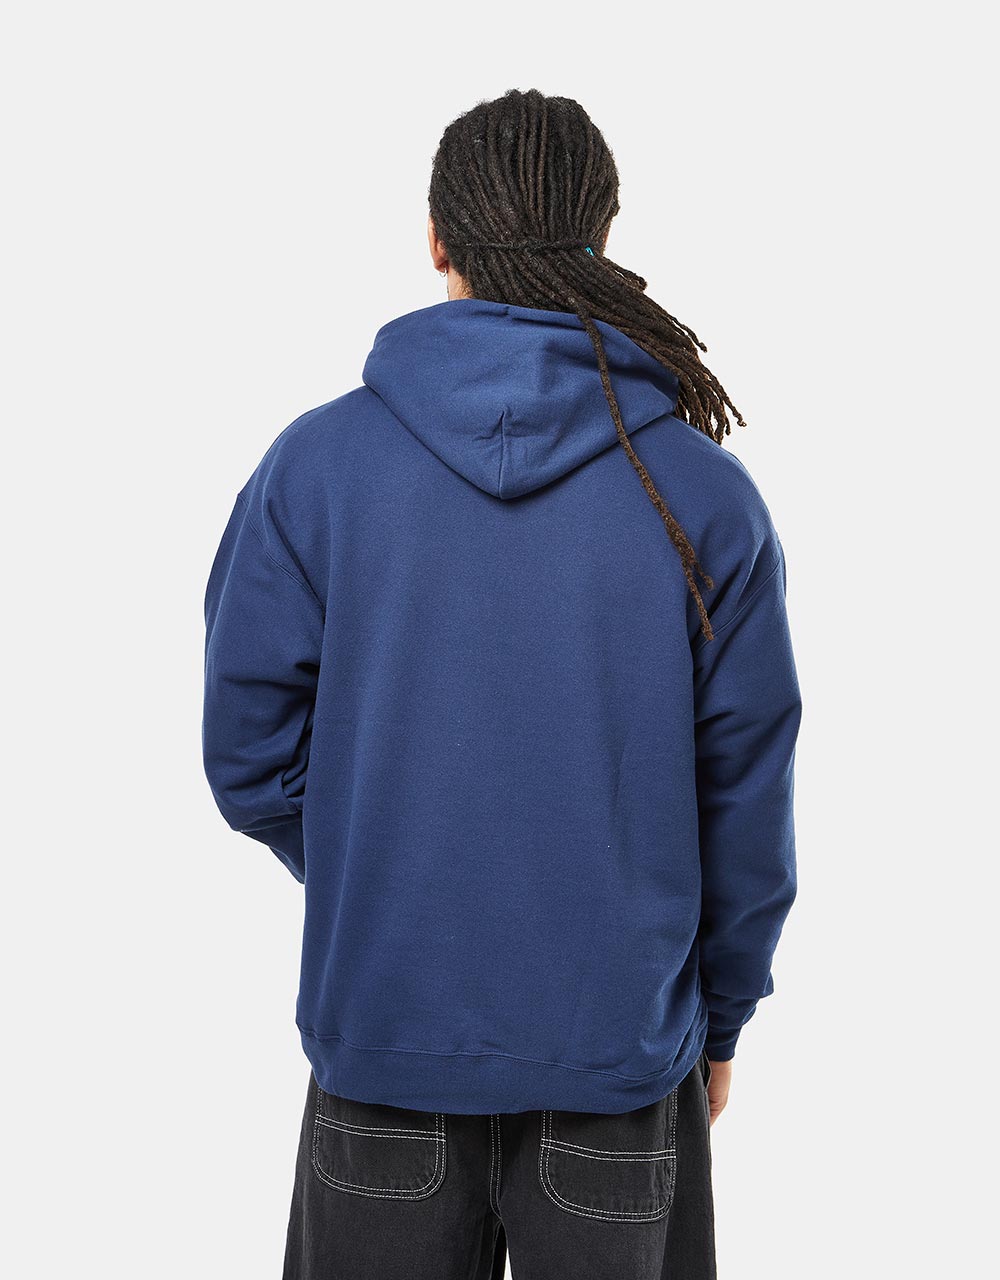 Thrasher Flame Logo Pullover Hoodie - Navy